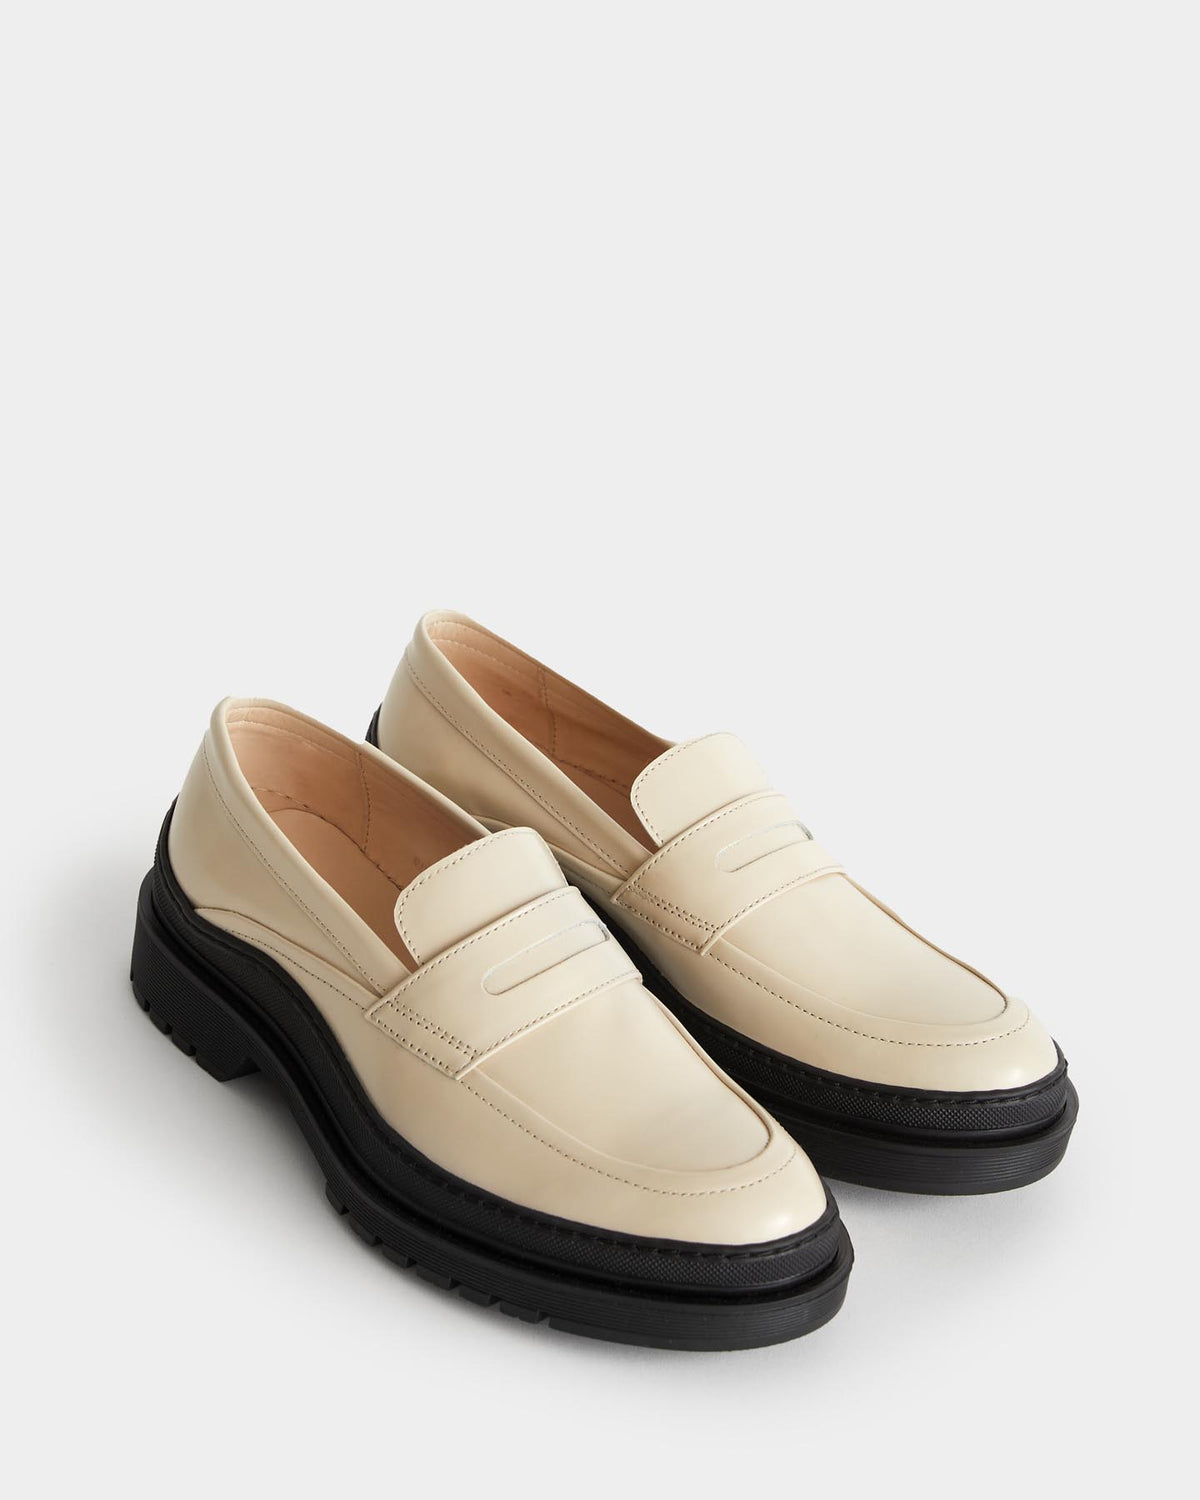 Graves Lugged Loafer